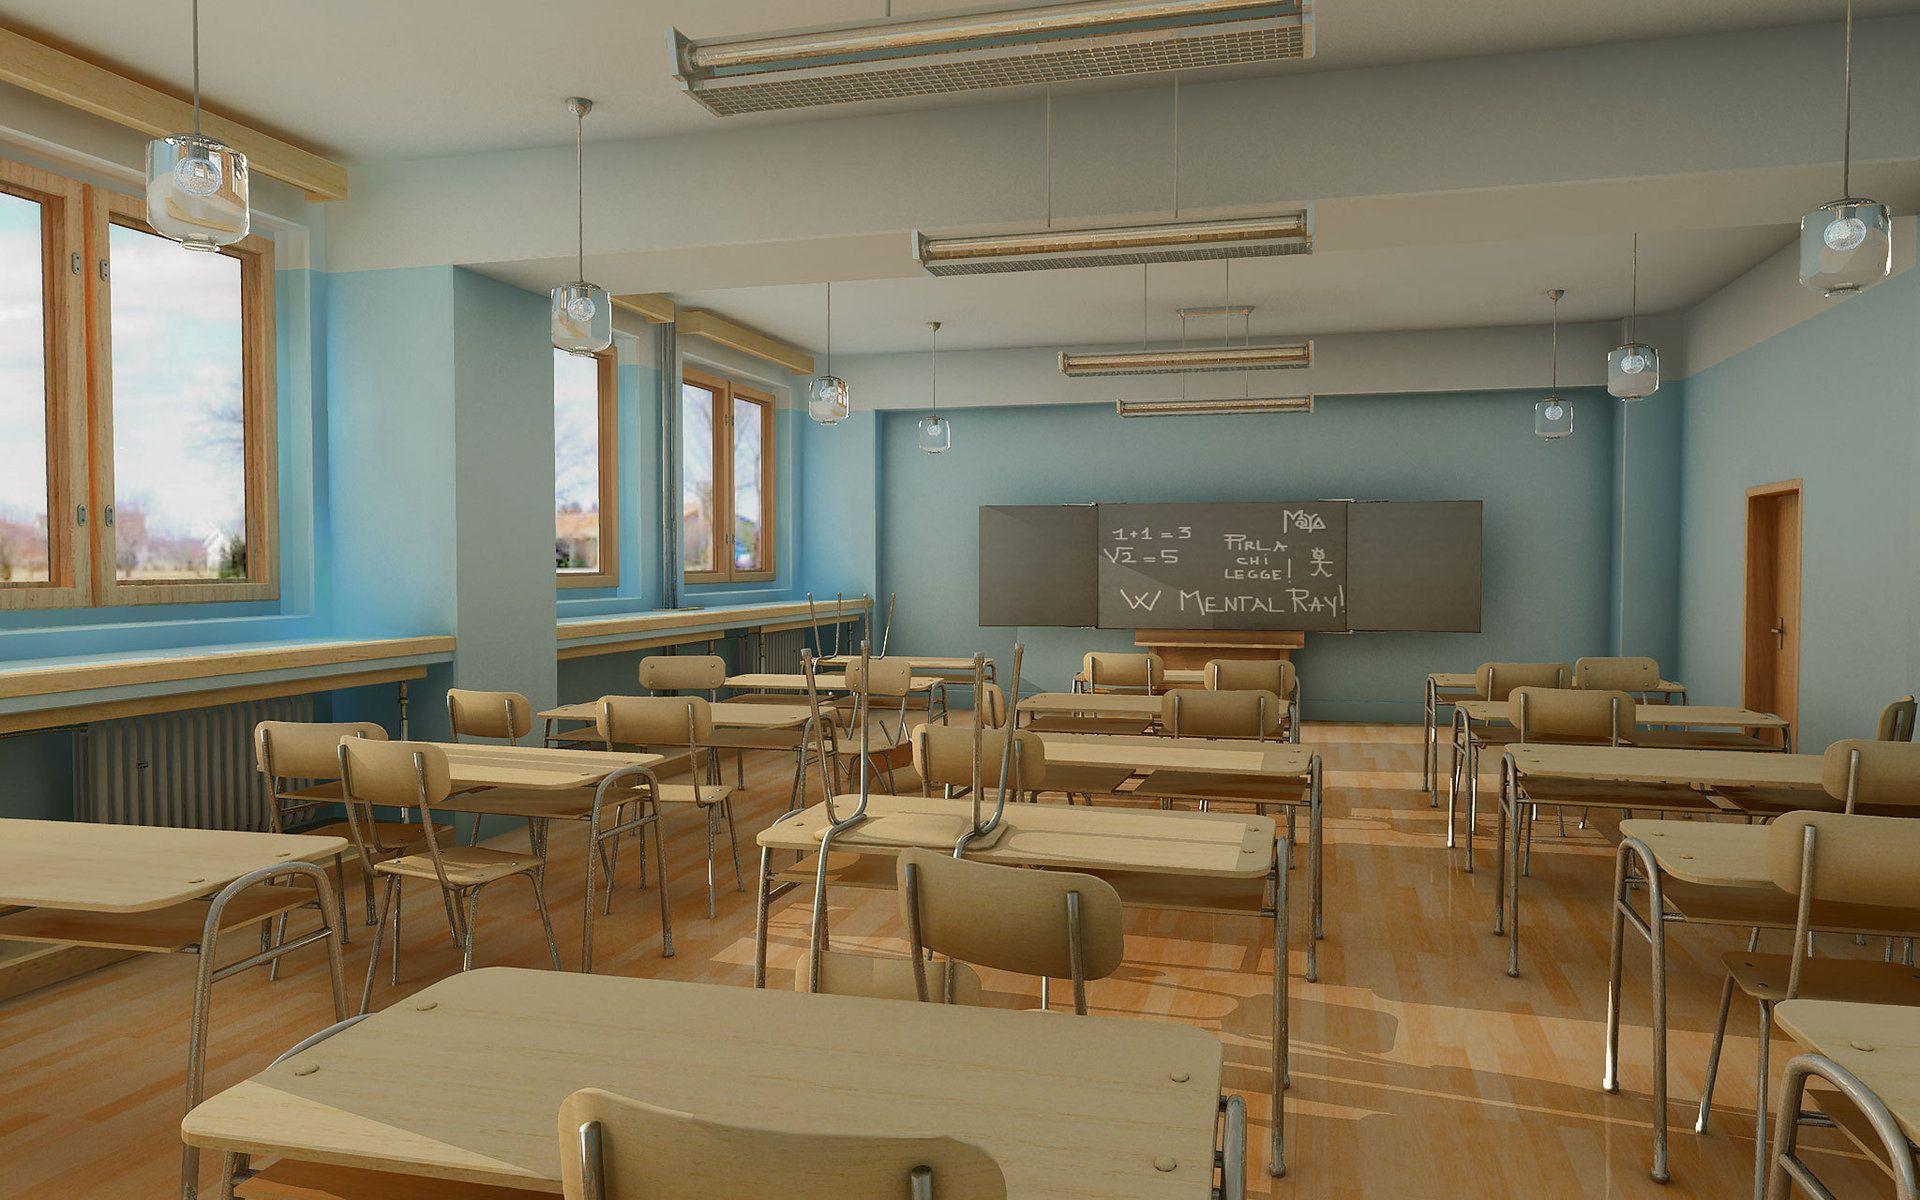  Classroom  Wallpapers  Top Free Classroom  Backgrounds 